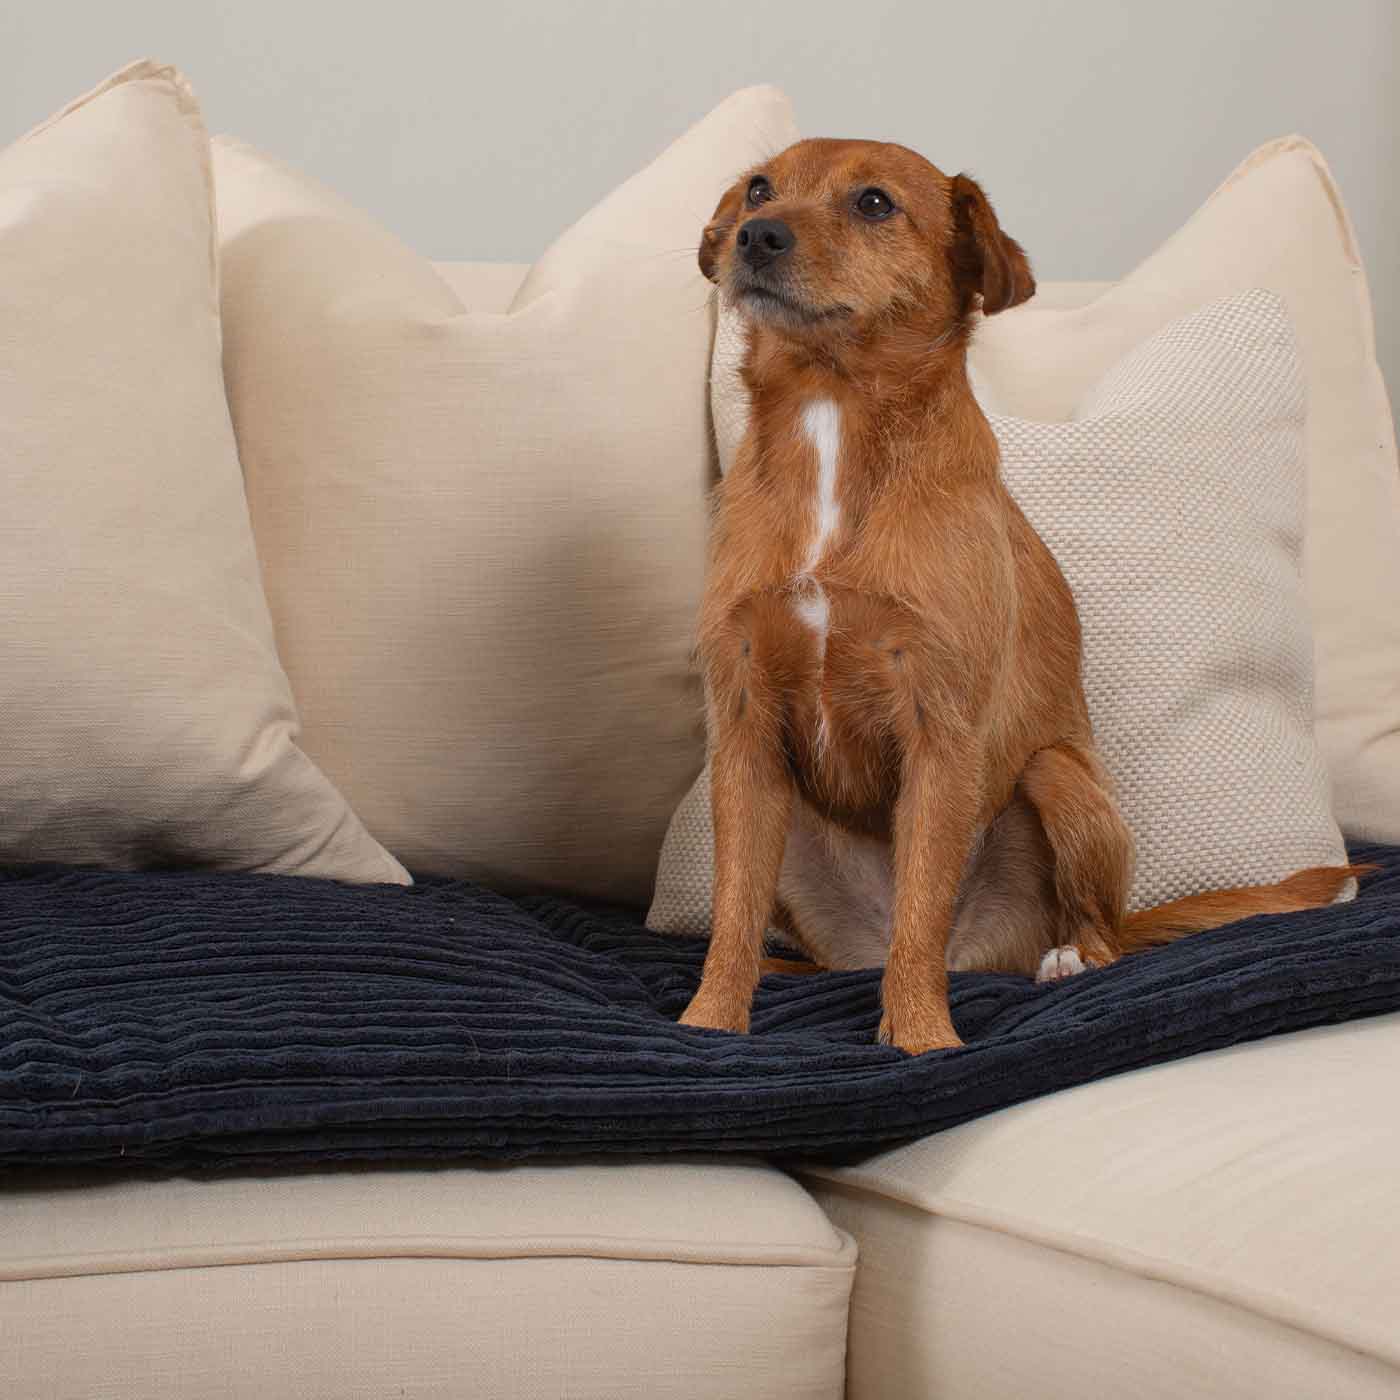 Sofa Topper in Navy Essentials Plush by Lords & Labradors